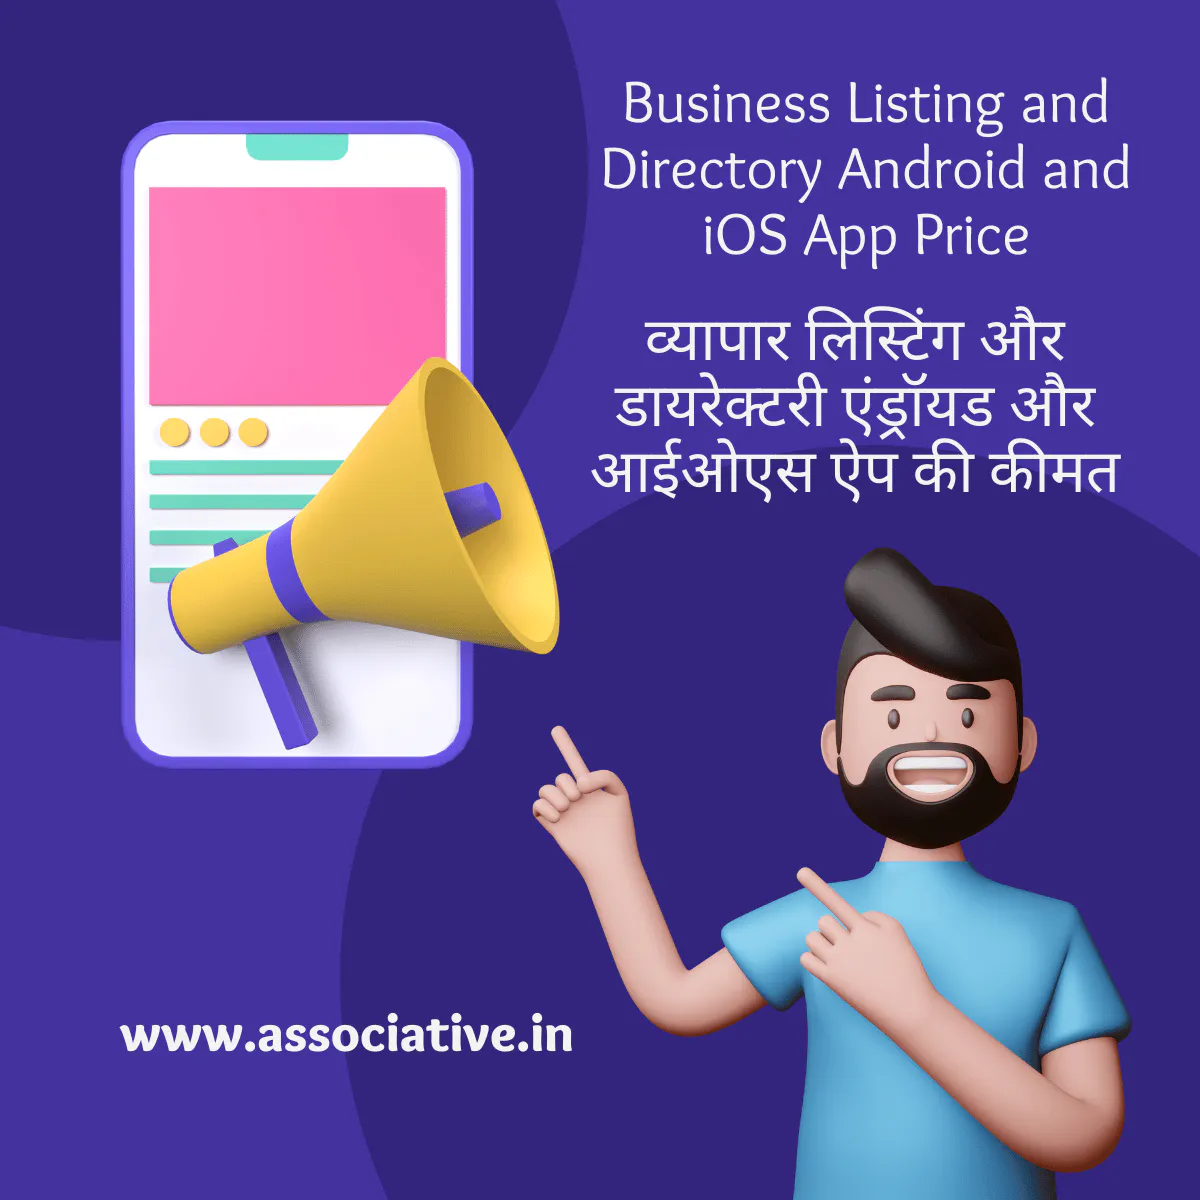 Business Listing and Directory Android and iOS App